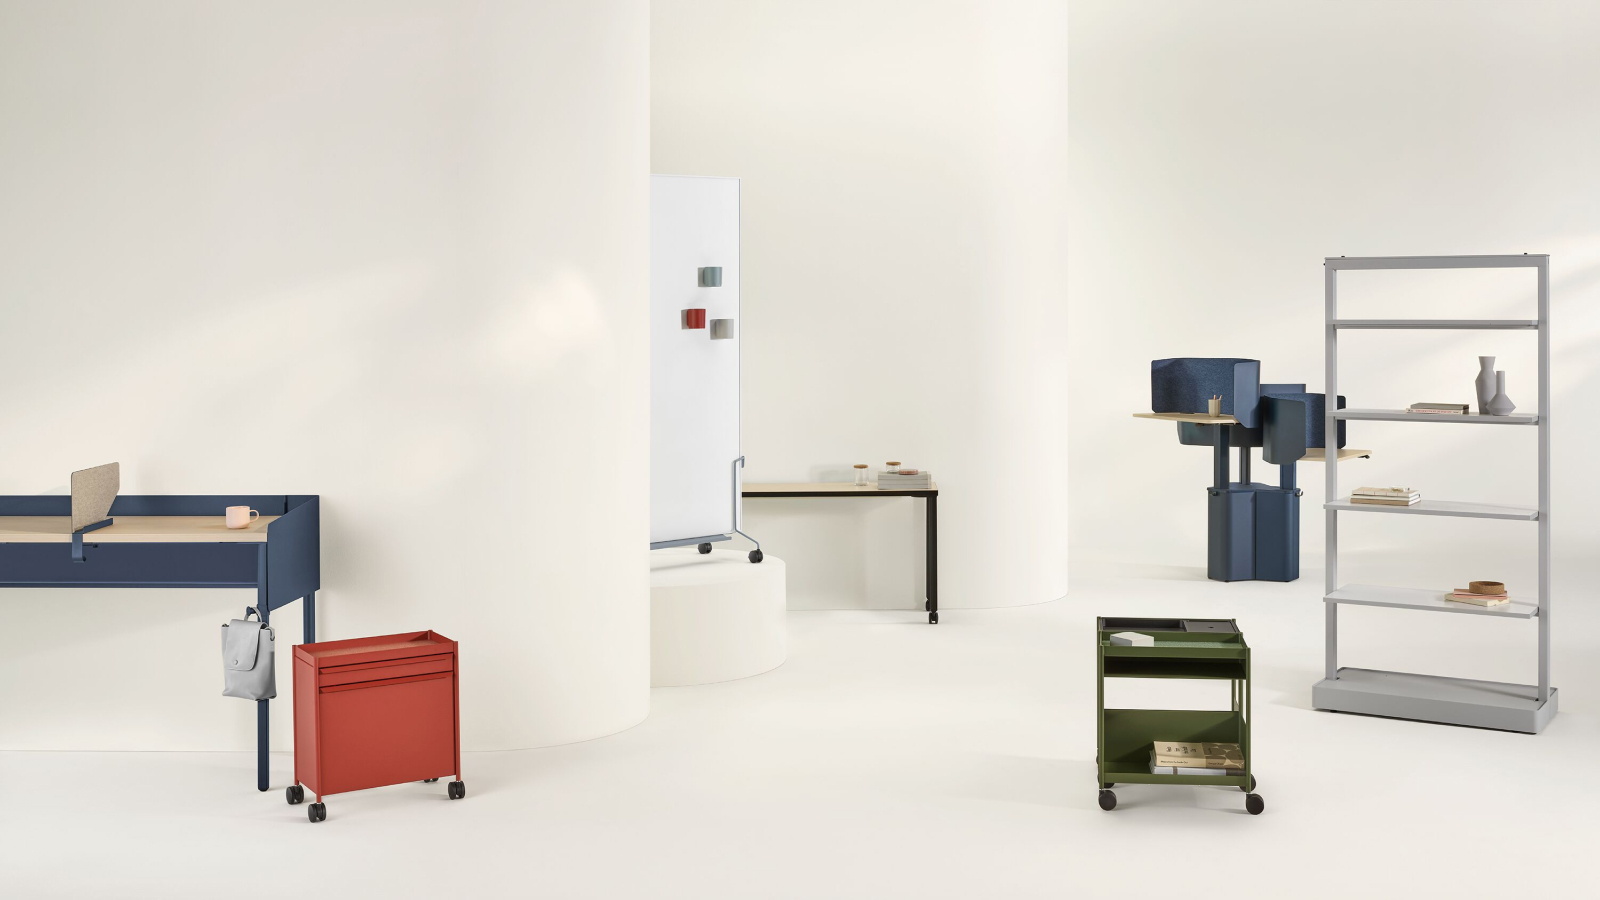 A collection of OE1 Workspace Collection products including OE1 Communal Table, OE1 Storage Trolleys, OE1 Agile Wall, OE1 Mobile Easel, OE1 Micro Pack and OE1 Rectangular Table in various colors.